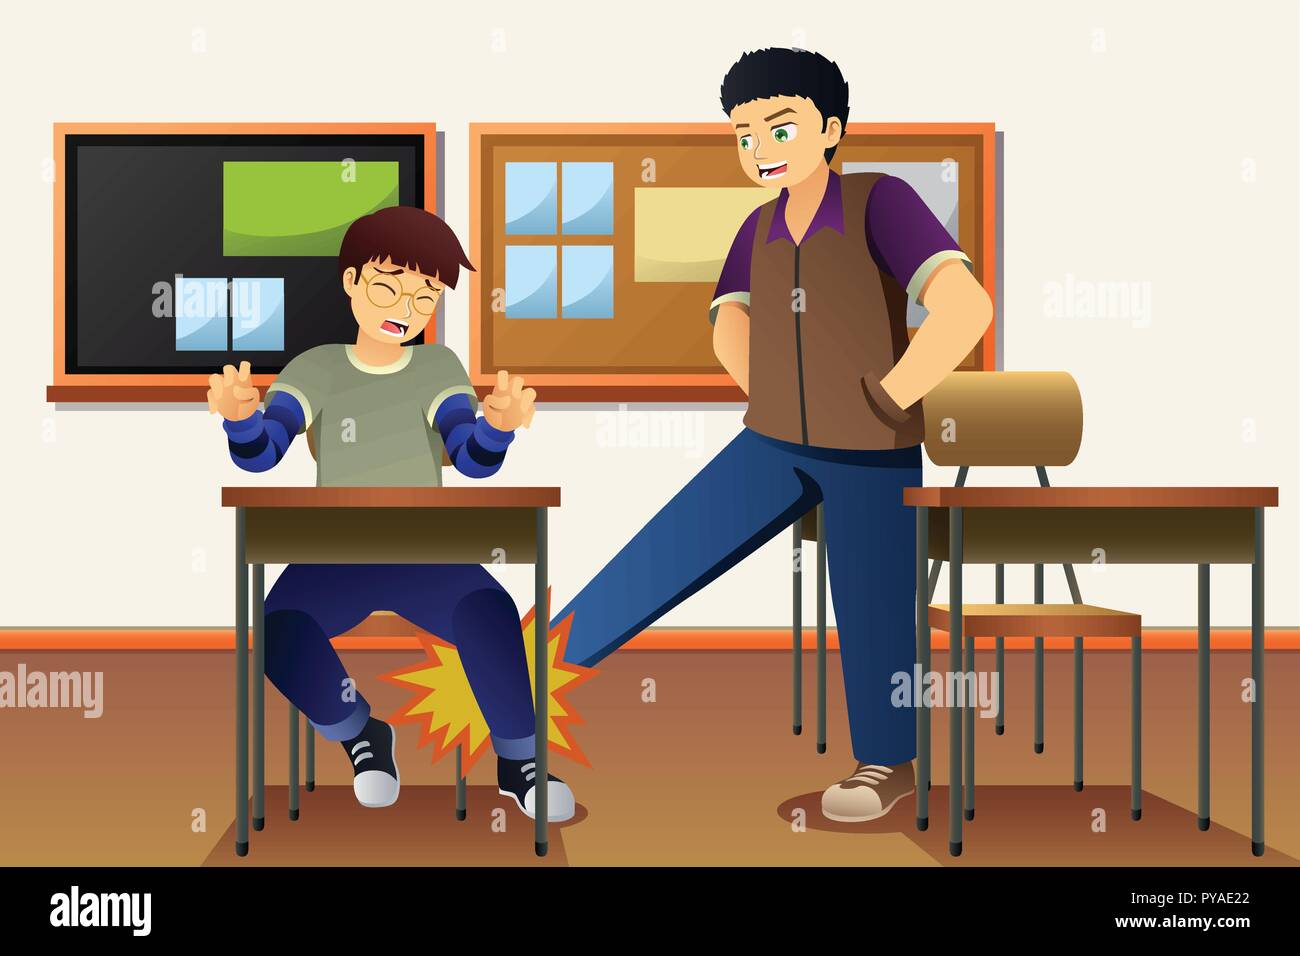 A vector illustration of Student Bullying His Friend Stock Vector